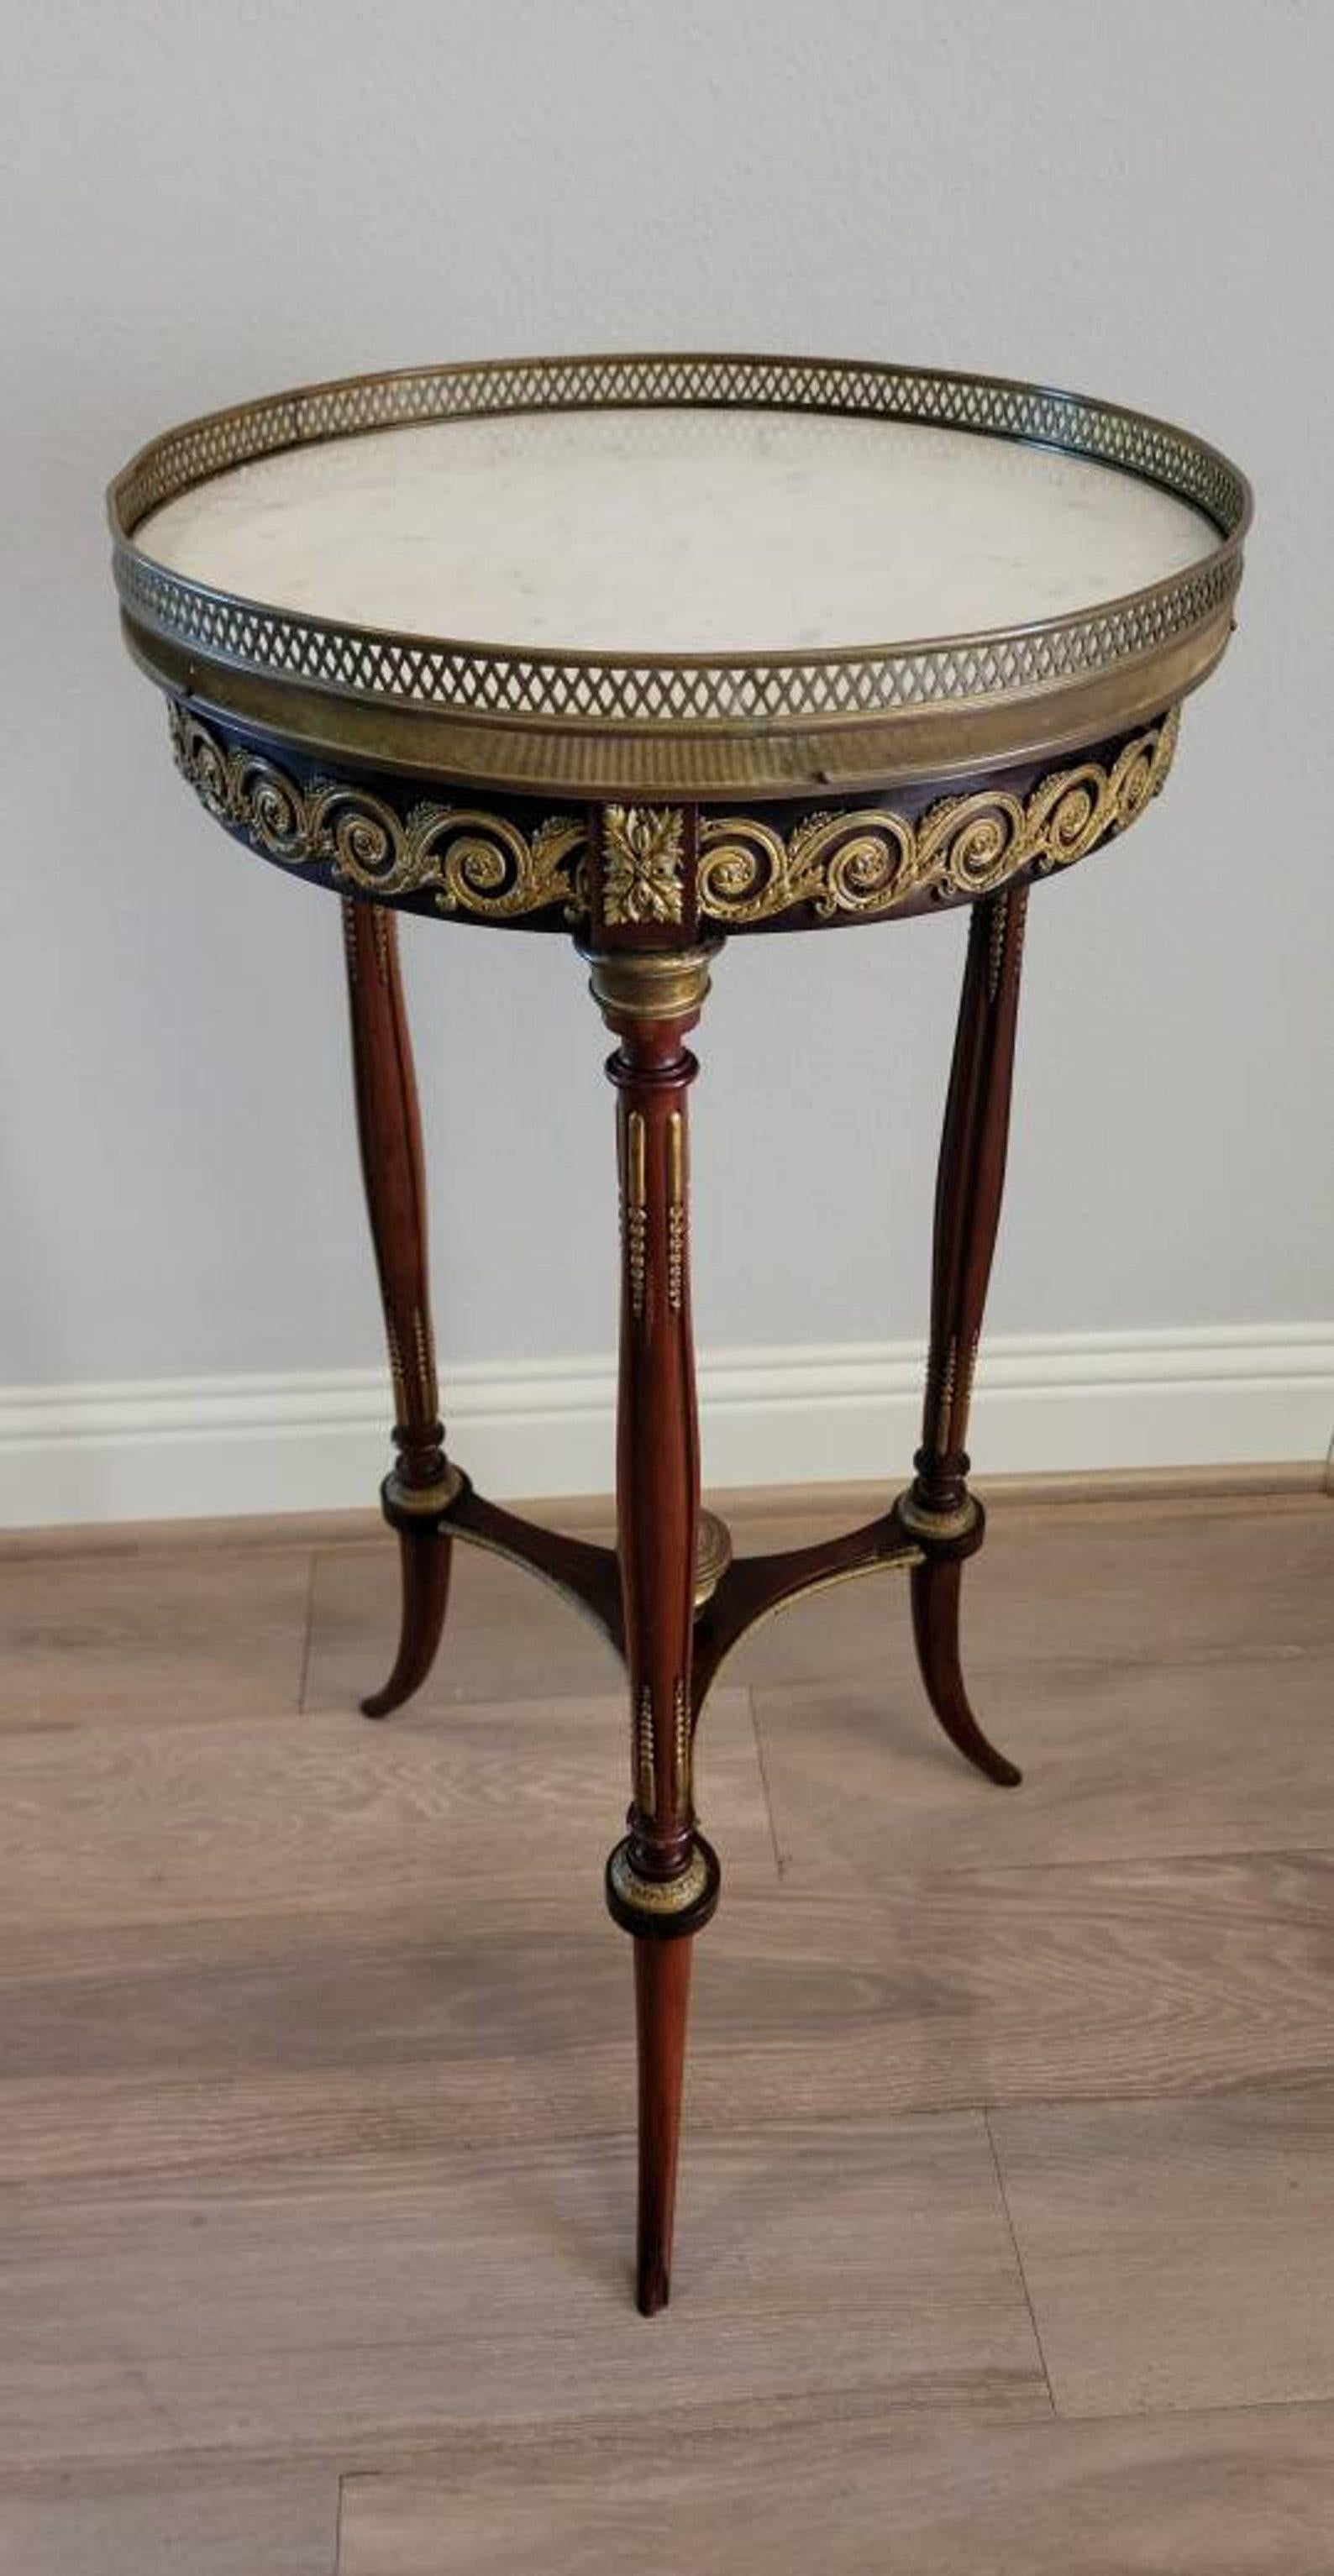 A lovely French Louis XVI style mahogany three leg pedestal stand / guéridon / side table with beautifully aged patina. 

Born in France in the early 20th century, styled in the manner of celebrated Parisian ébéniste Francois Linke (b.1855-1946),